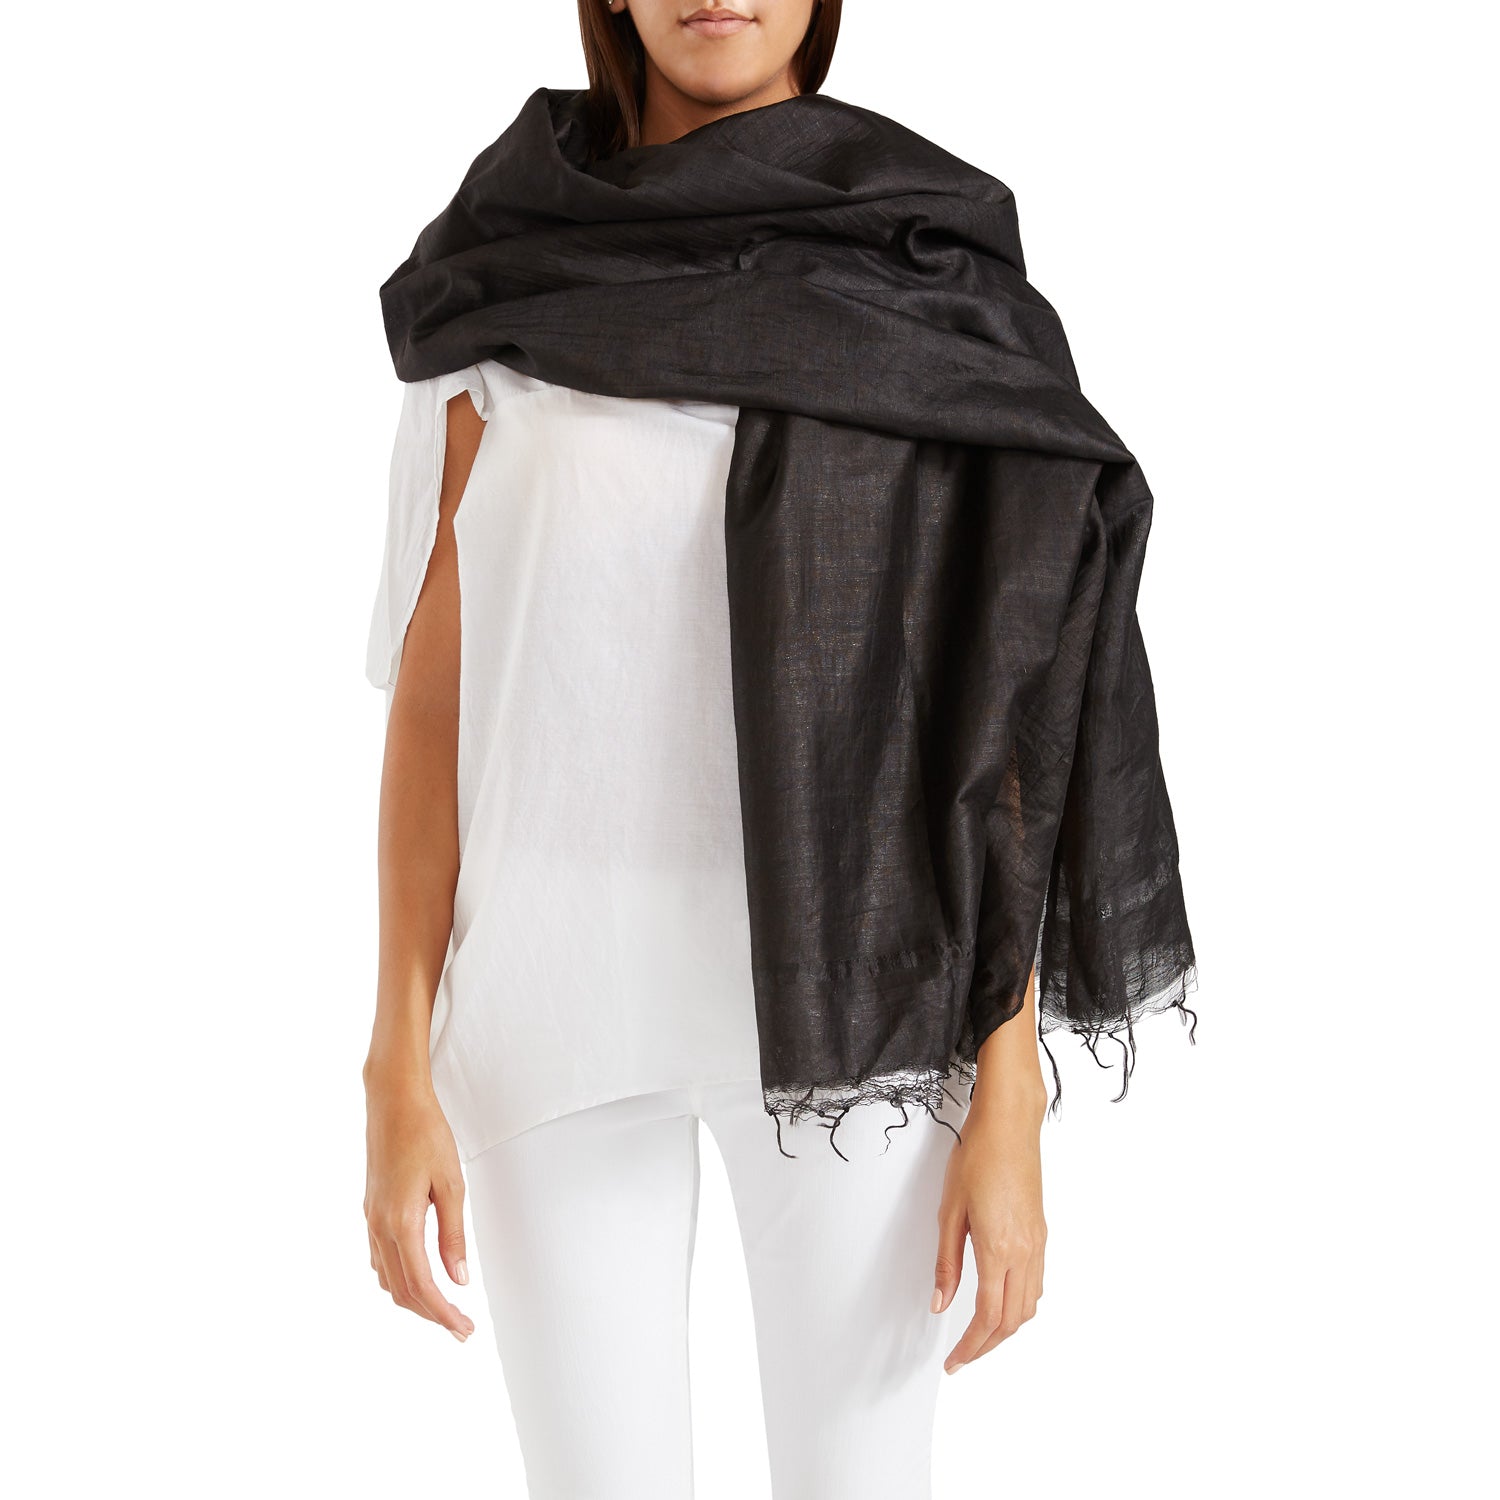 Fringed Silk and Cashmere-Blend Scarf